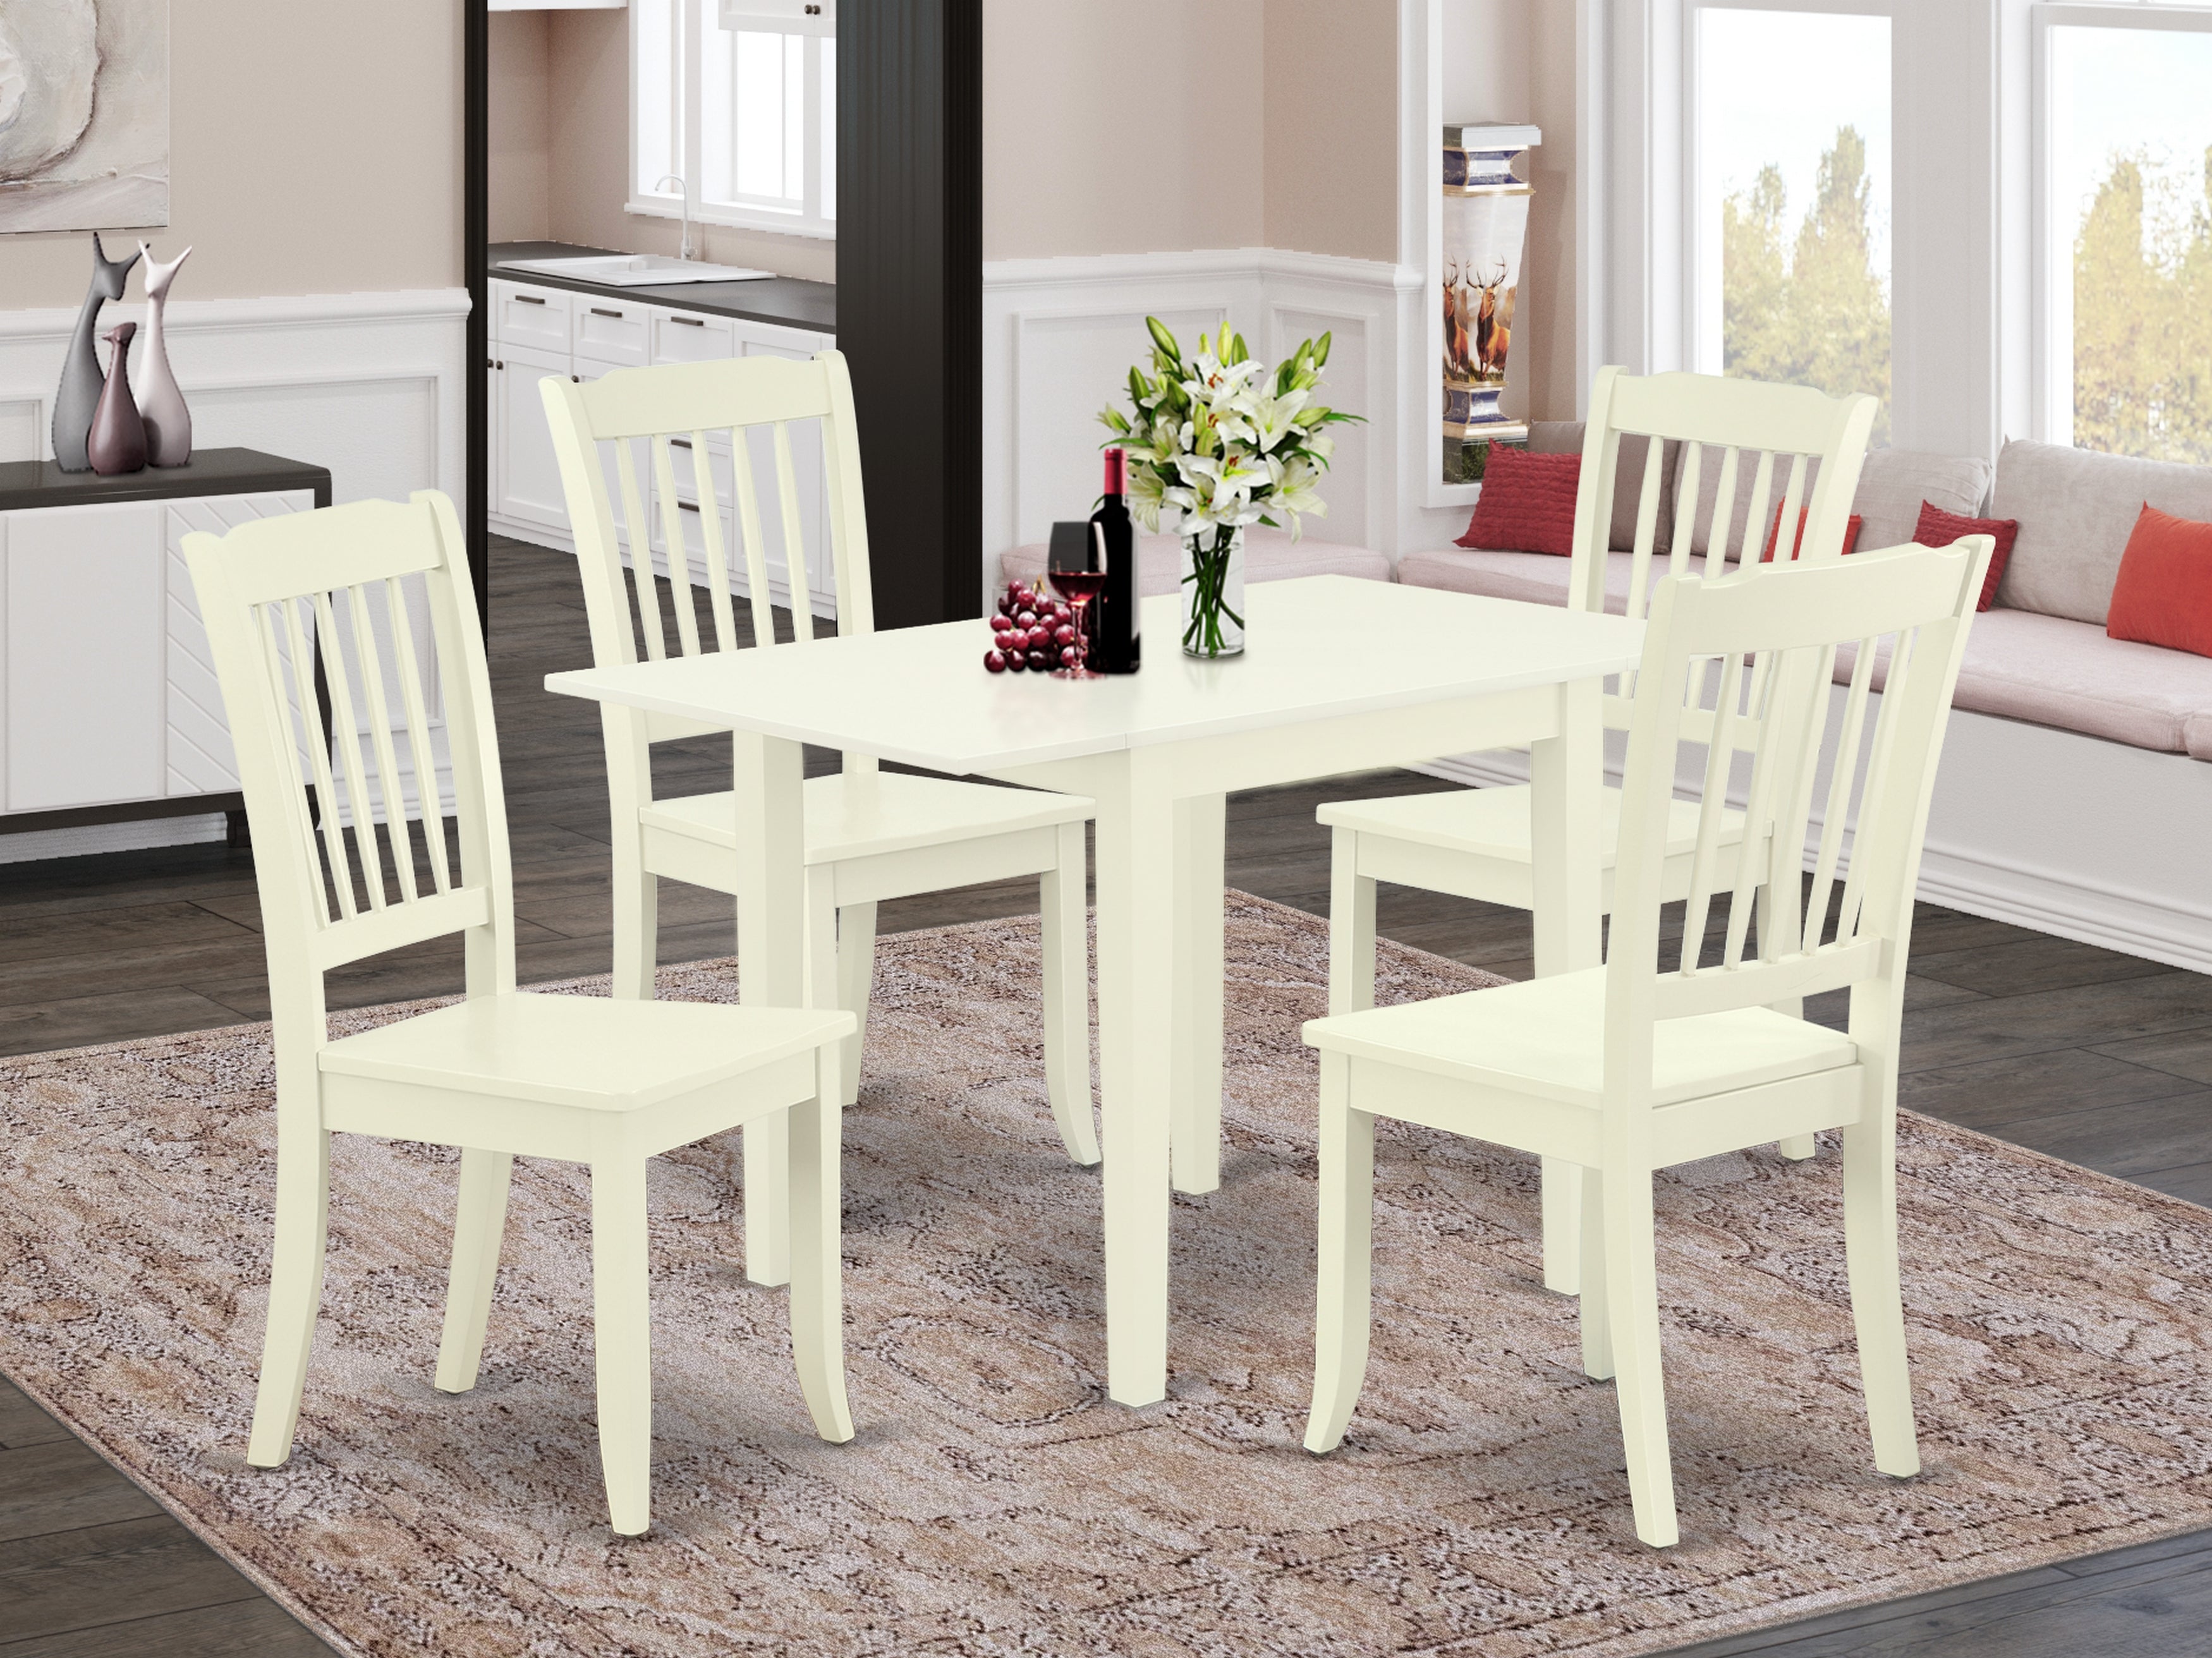 East West Furniture NDDA5-LWH-W Kitchen Table Set 5 Pcs- 4 Brilliant Dining Room Chairs and a Lovely Kitchen Table - Linen White Finish Solid Wood Chair Seat and Table Top - Linen White Finish Solid Wood Frame.